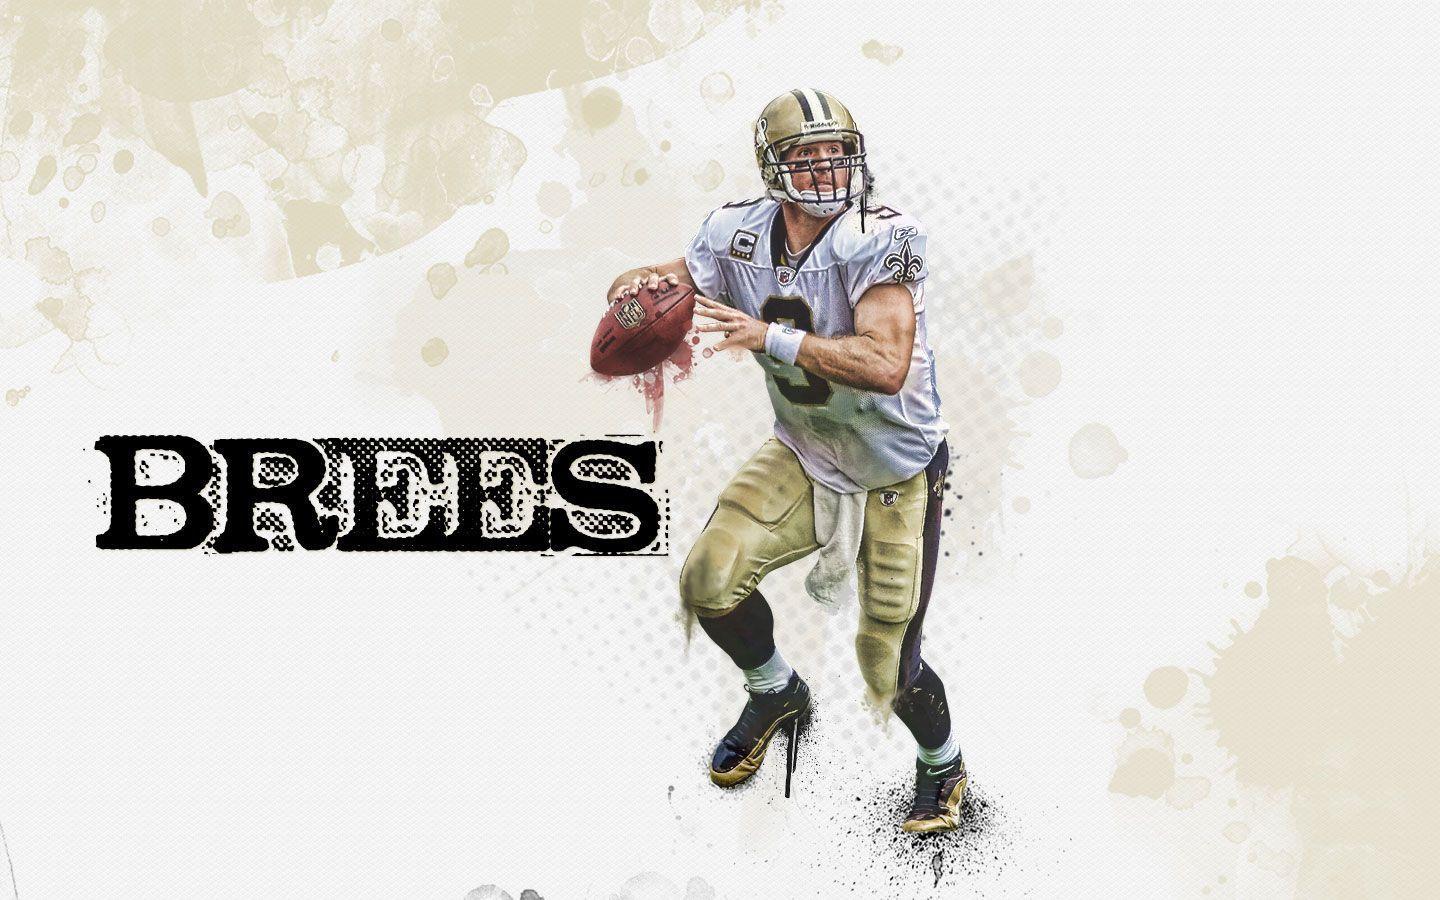 Policy Linking Drew Brees Coon 386 X 500 129 Kb Jpeg. TUTORIAL